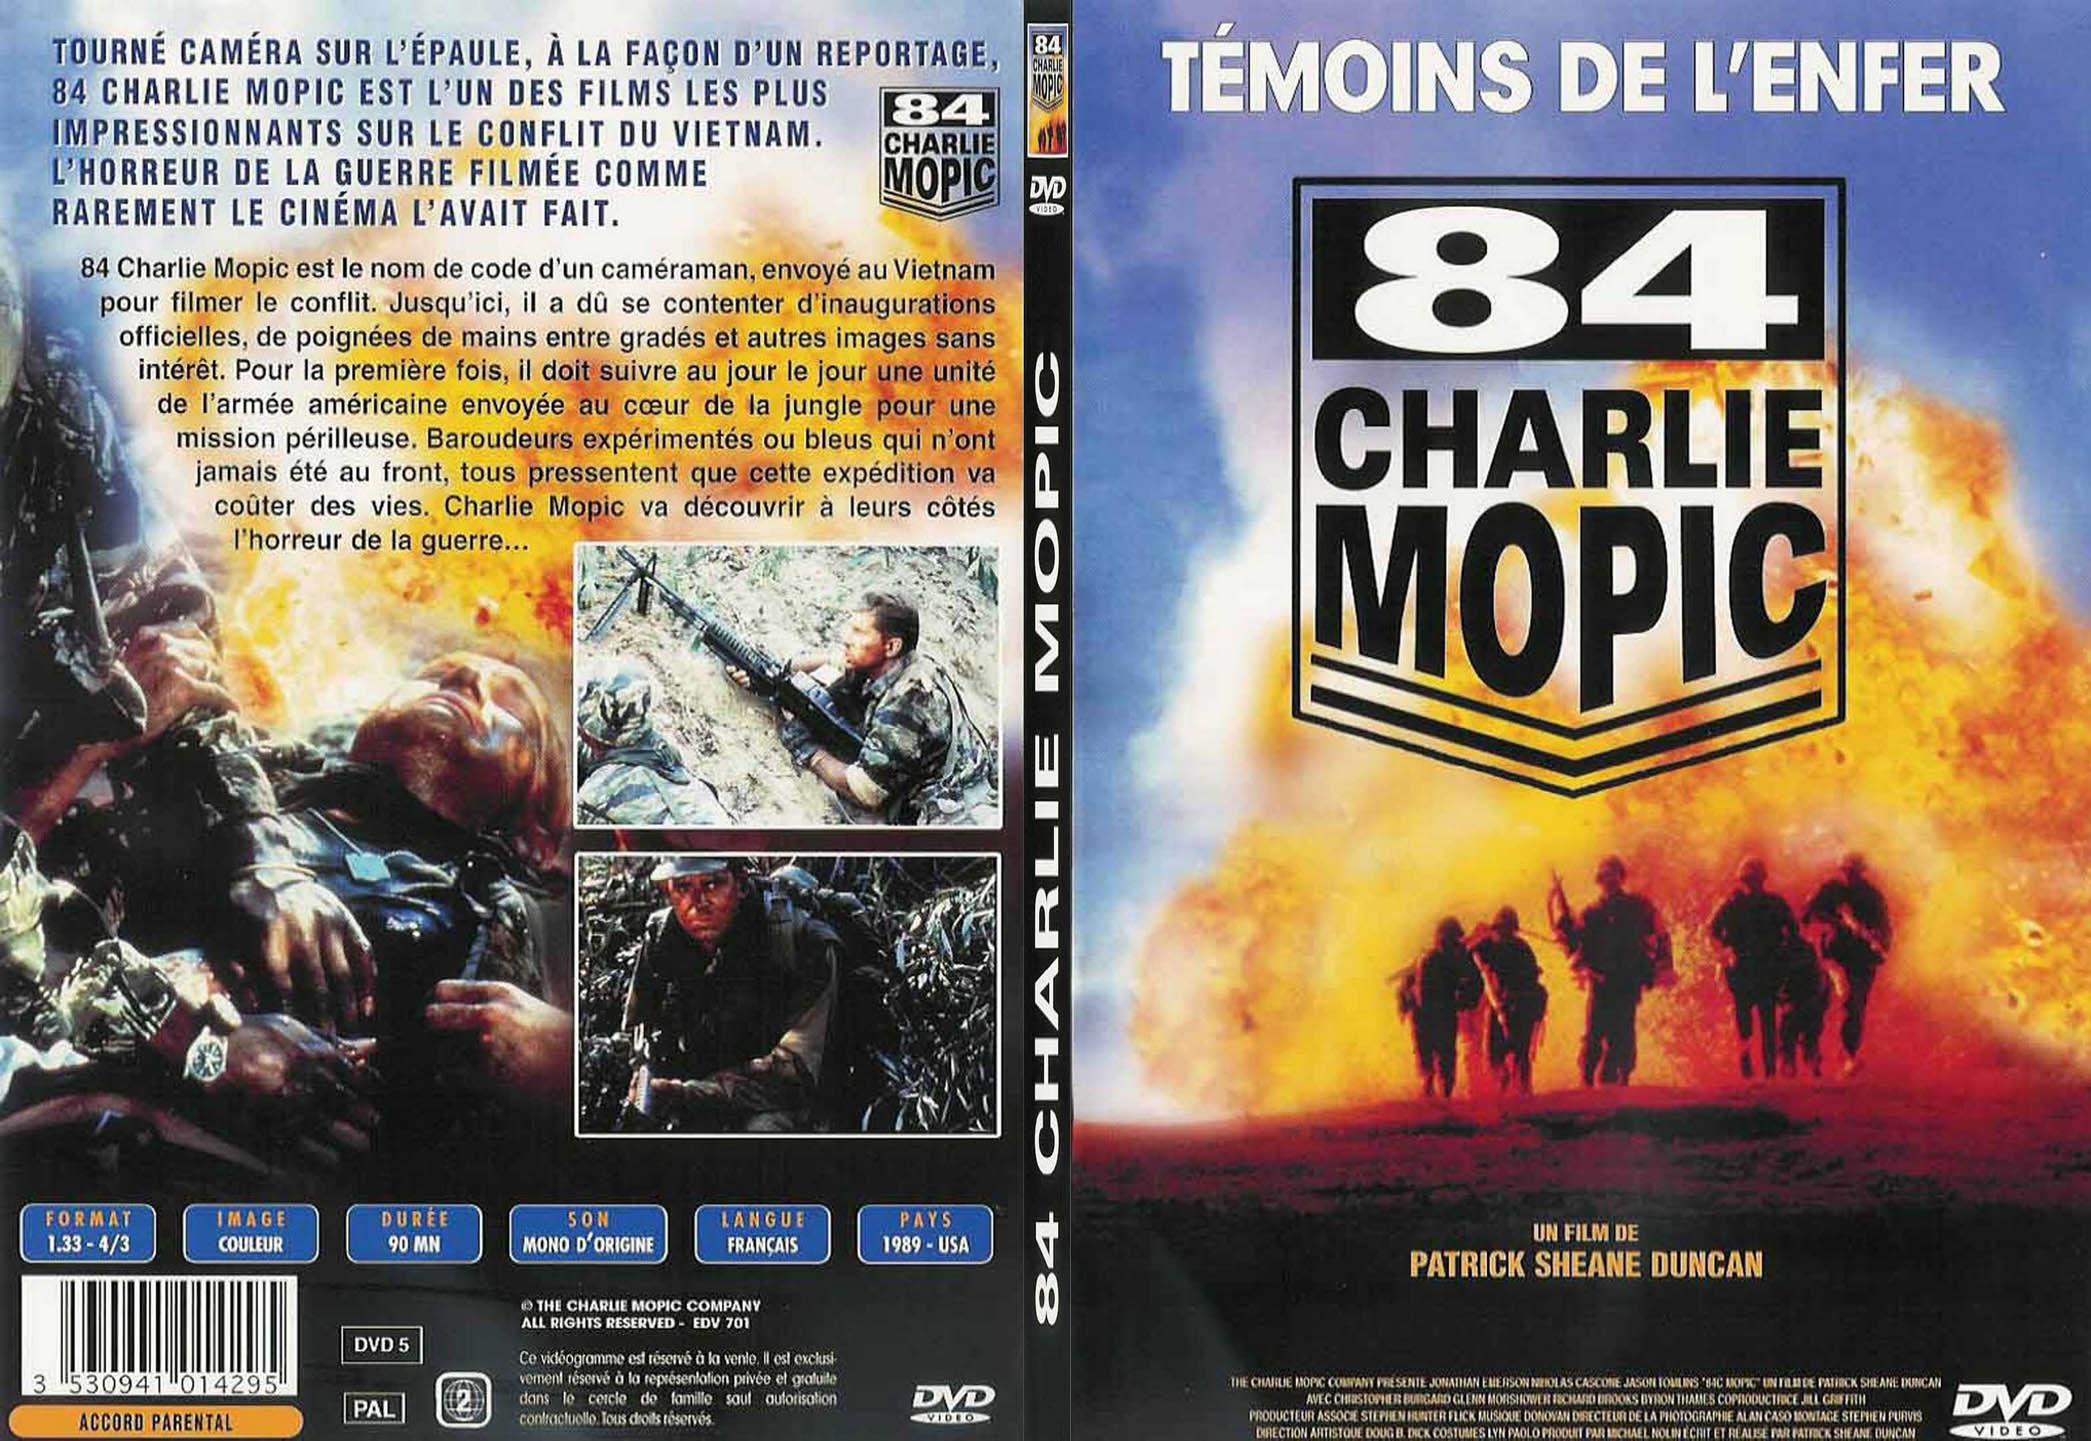 Jaquette DVD 84 charlie mopic - SLIM